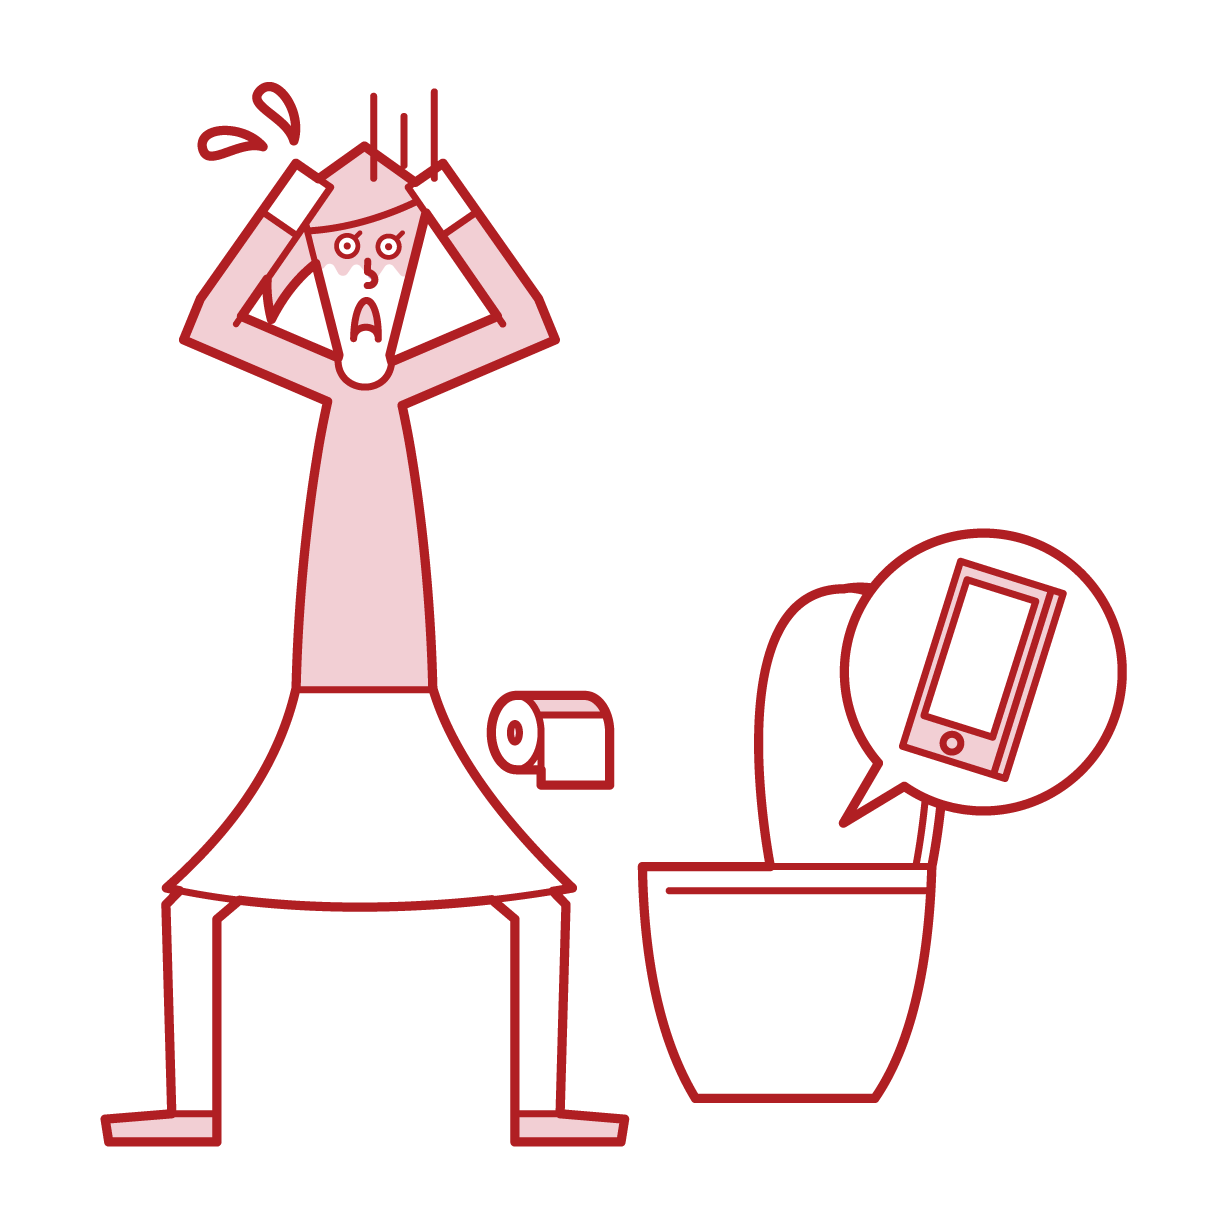 Illustration of a woman dropping her smartphone on a toilet bowl